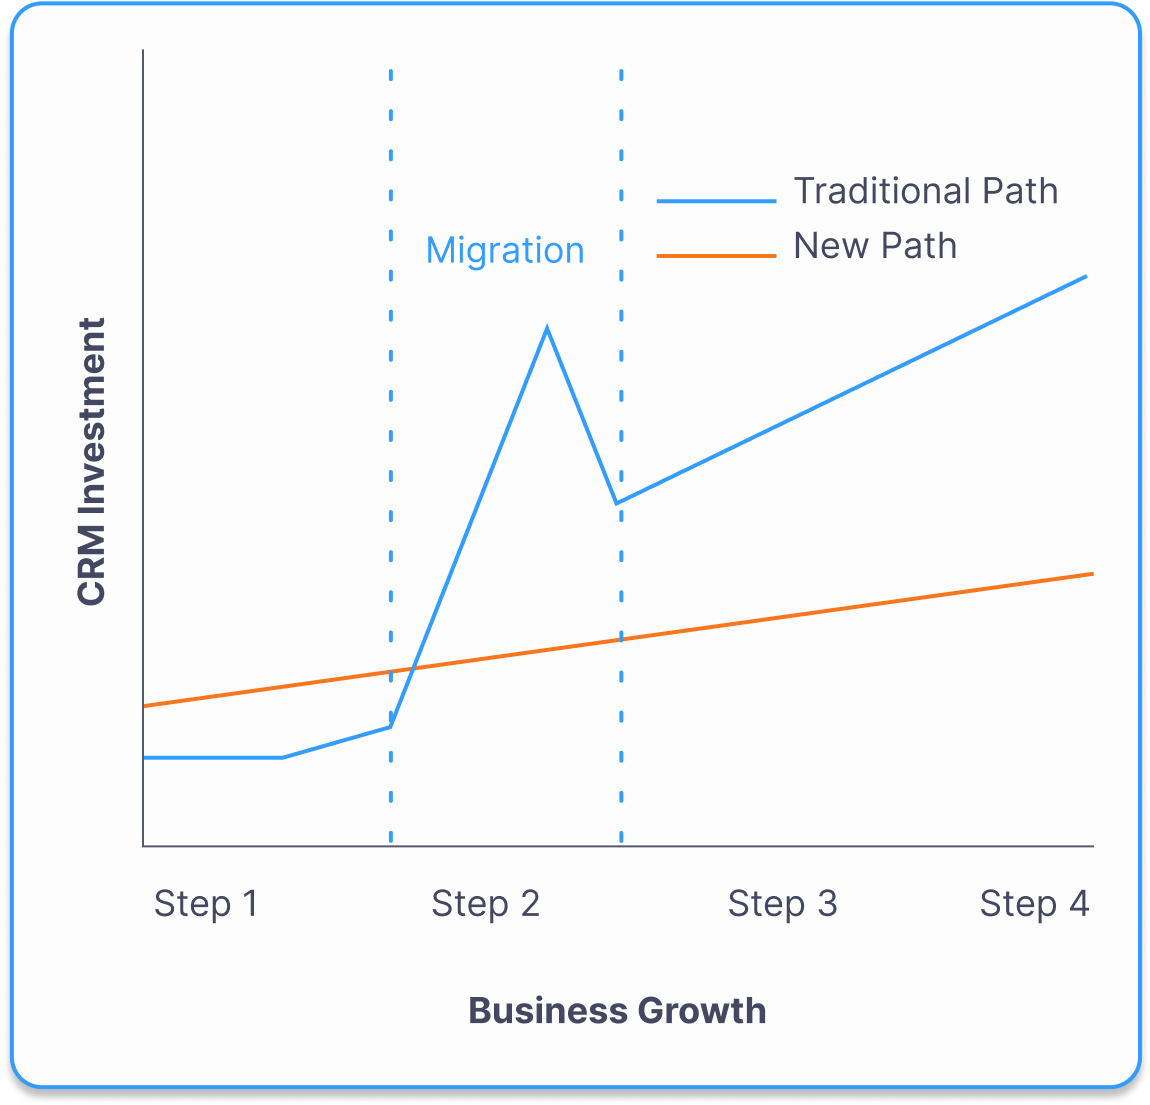 Chart showing how the traditional path to CRM has a low initial investment that rapidly spikes and keeps growing compared to the new path of slightly higher initial investment leading to smooth and easy increase in investment costs over time.